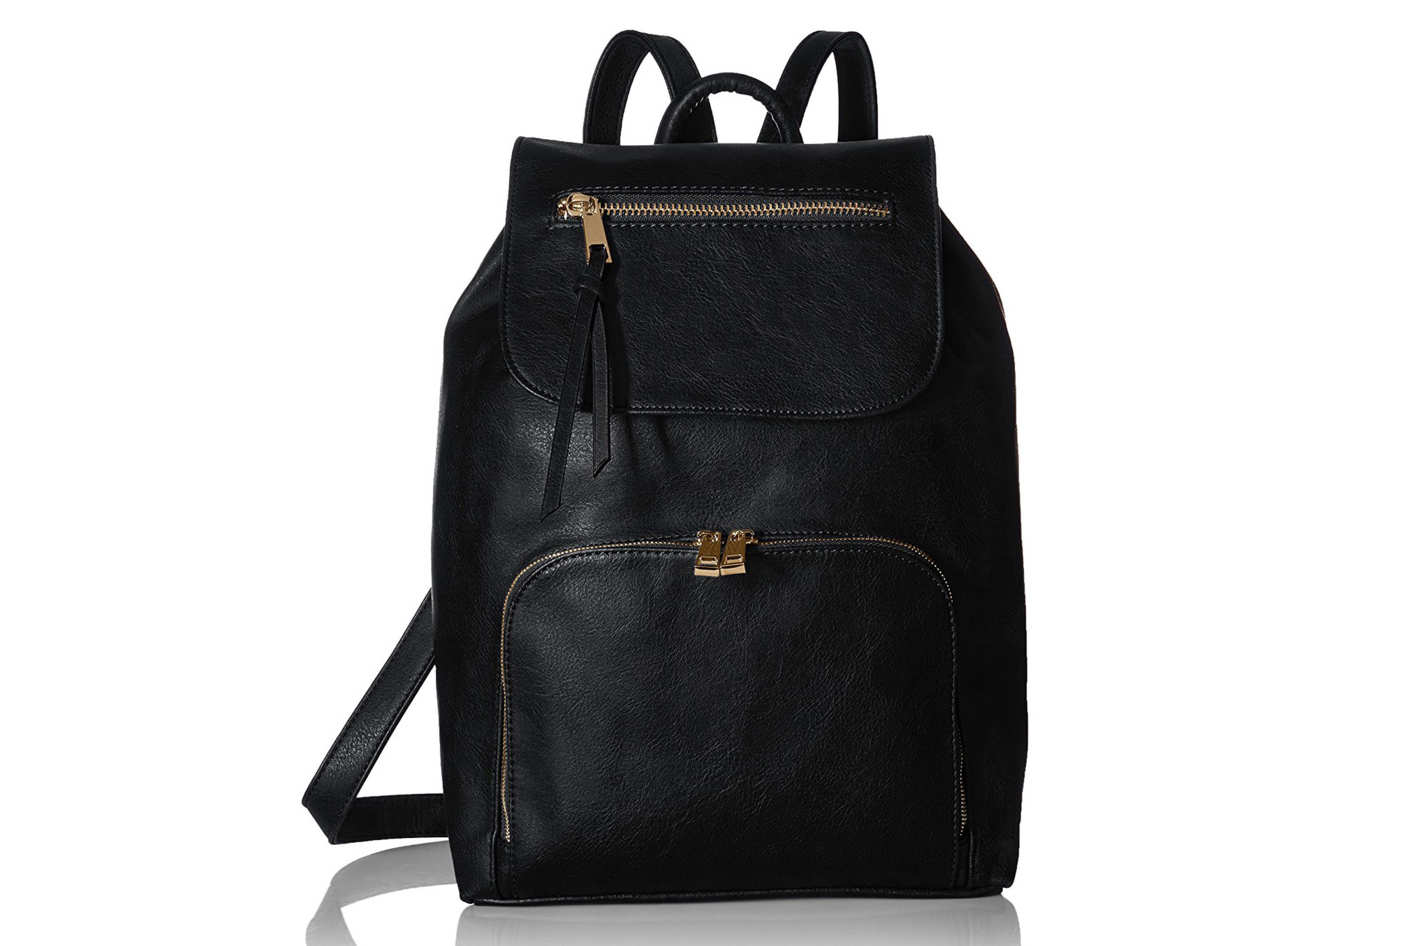 fashion backpacks u201cthere are so many black faux leather backpacks on the market, but this one JRPXSGN